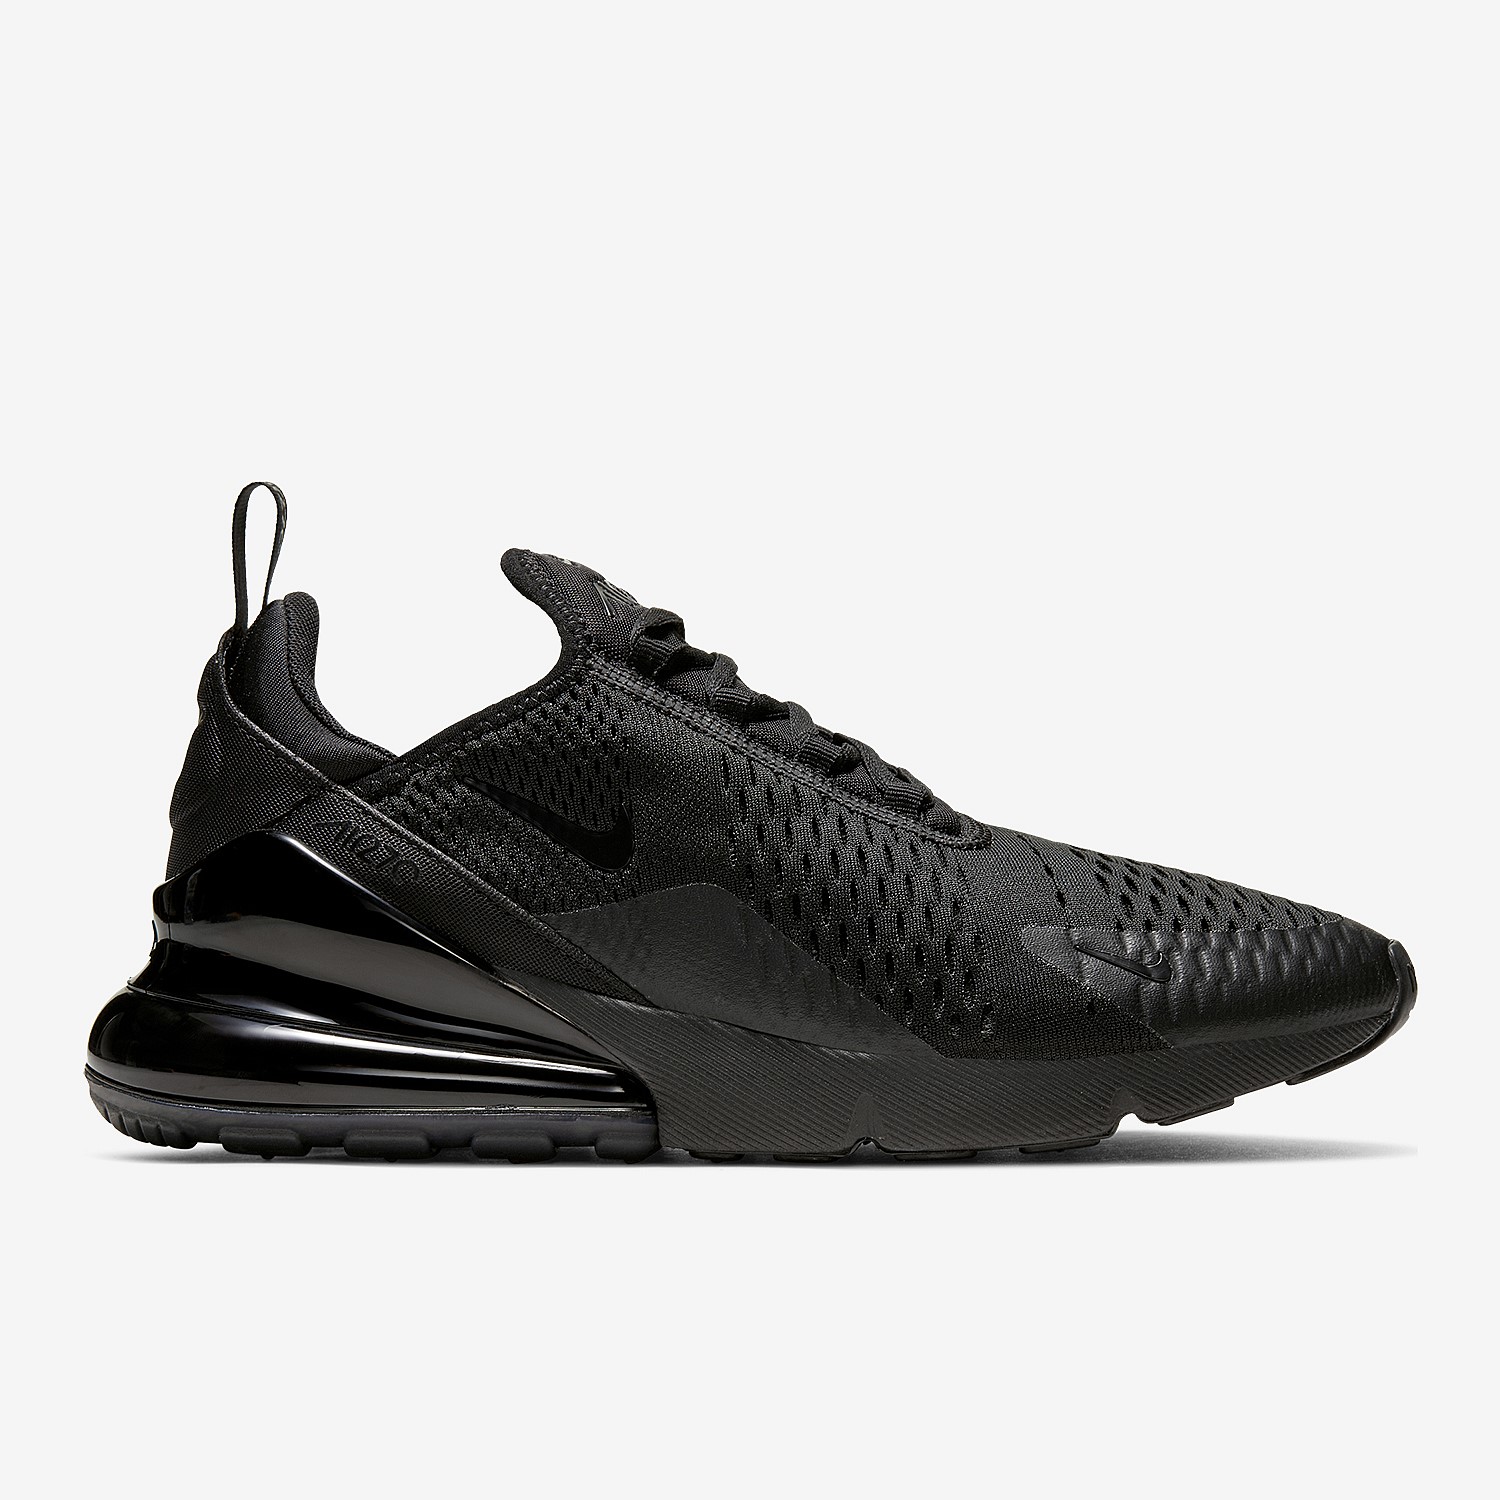 Shop Men's Sneakers Online | Stirling Sports - Air Max 270 Mens